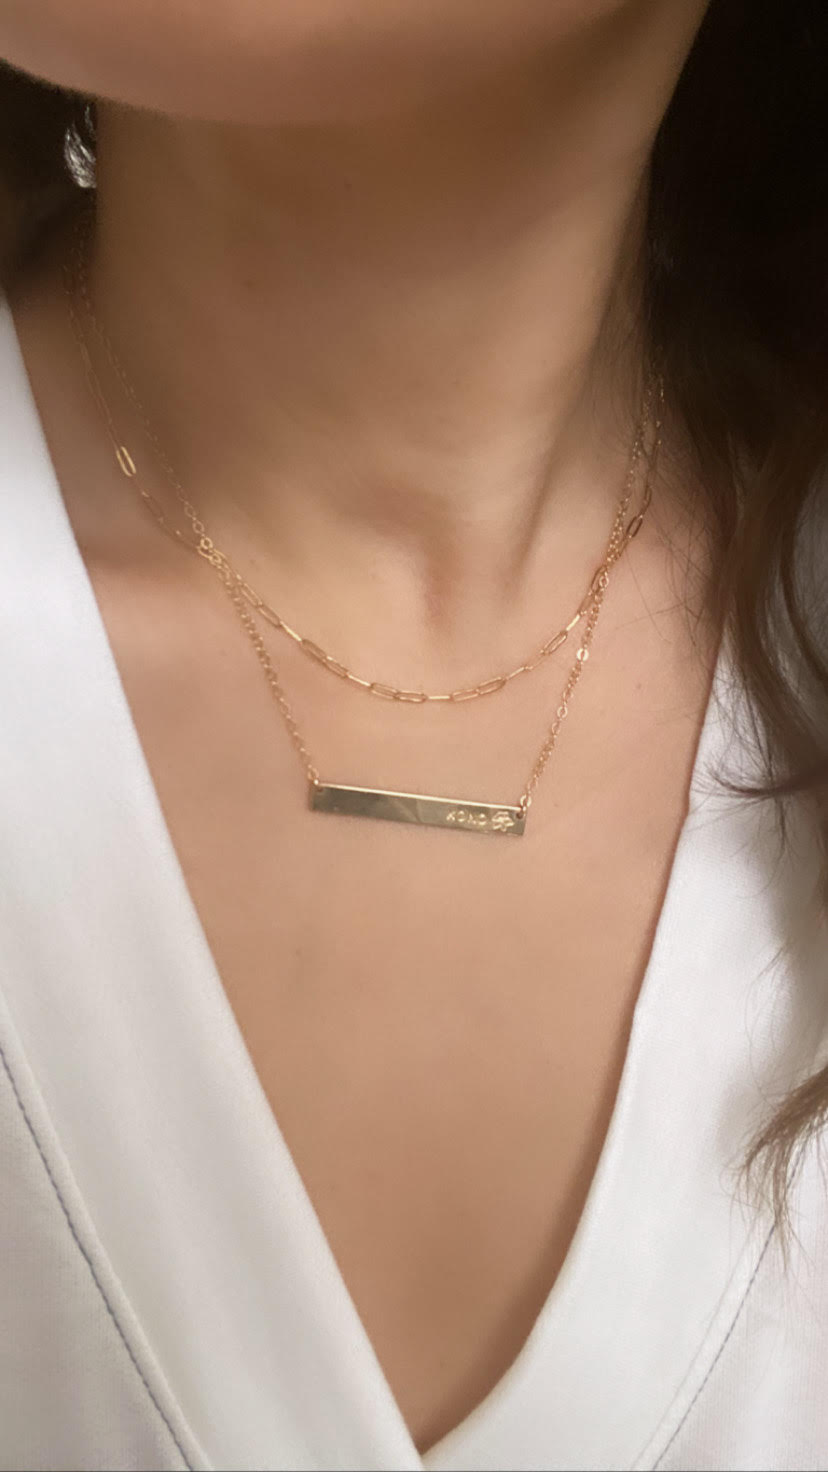 Name Bar Necklace - Hand Stamped - Customize